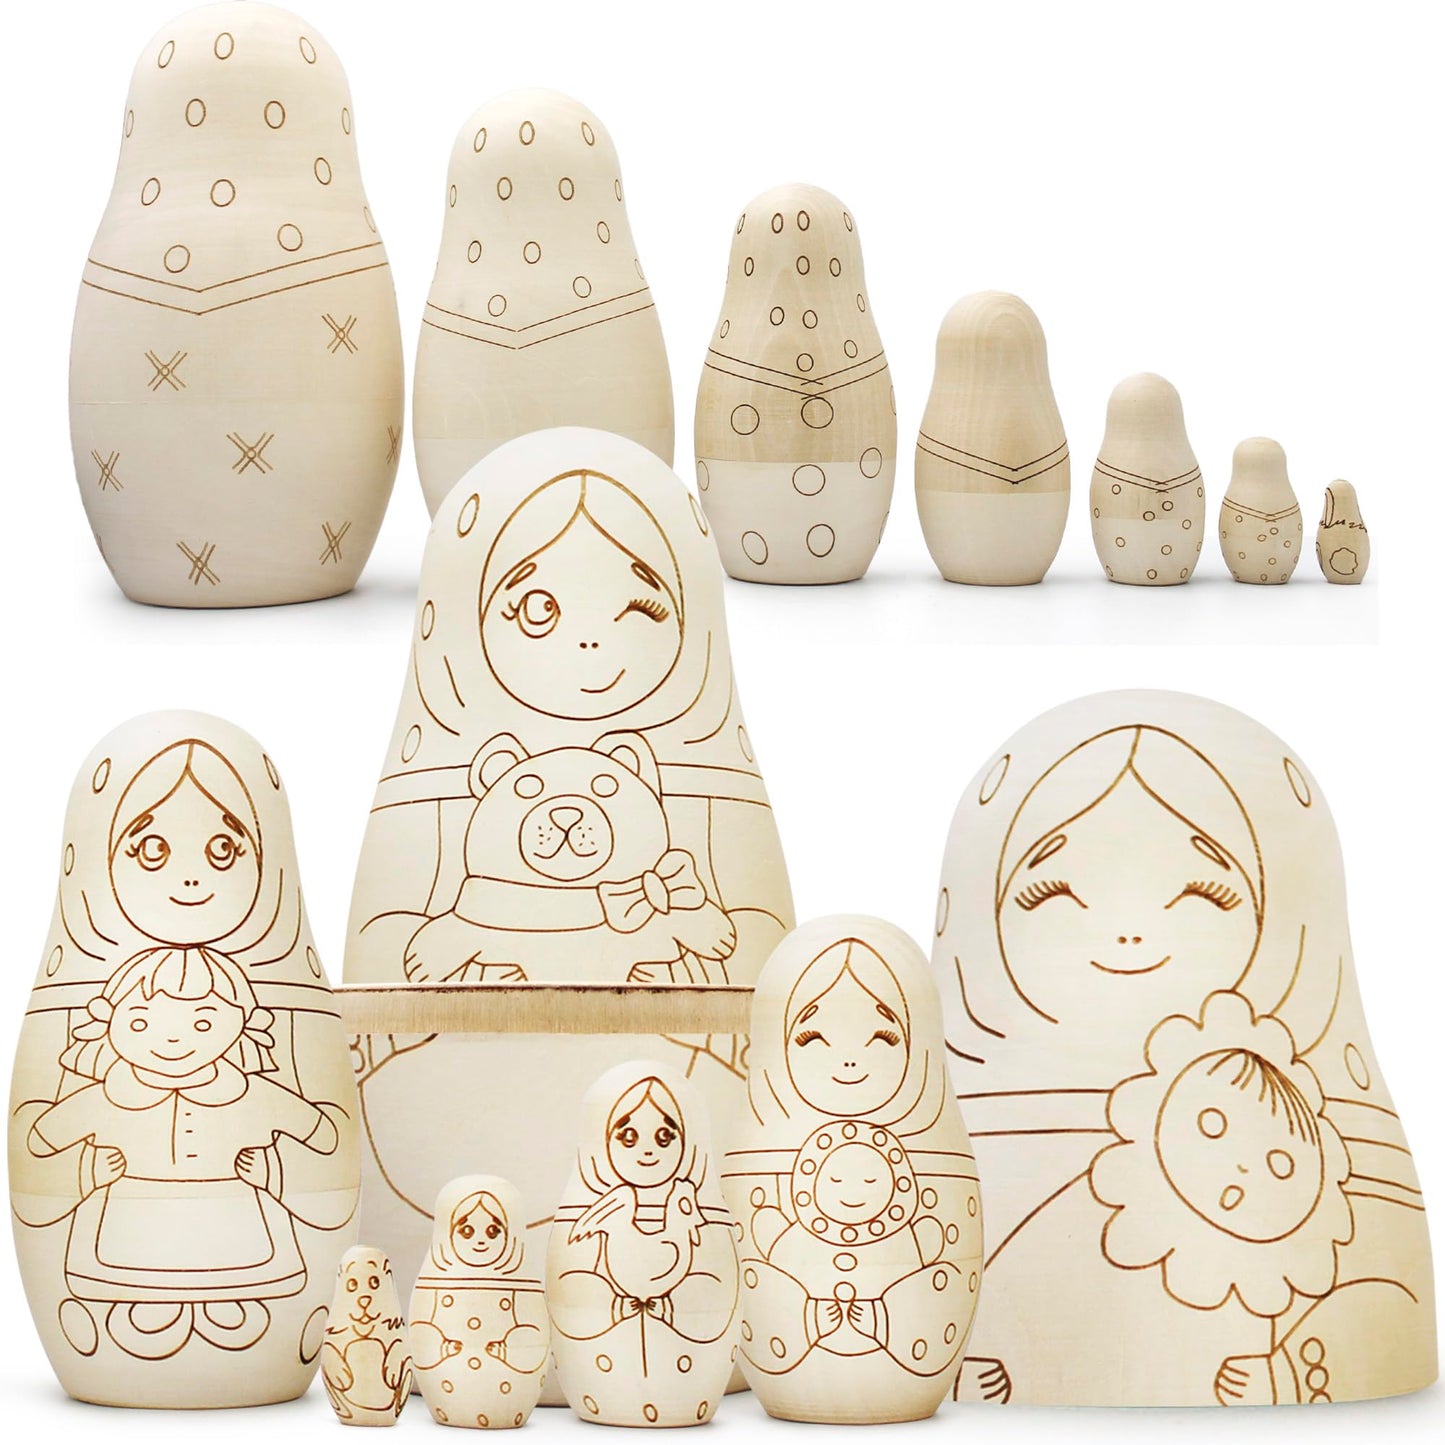 AEVVV Unfinished Wood Crafts to Paint Your Own Matryoshka Doll, 7 pcs - Unpainted Russian Nesting Dolls DIY Projects, Arts and Crafts - Russian Dolls